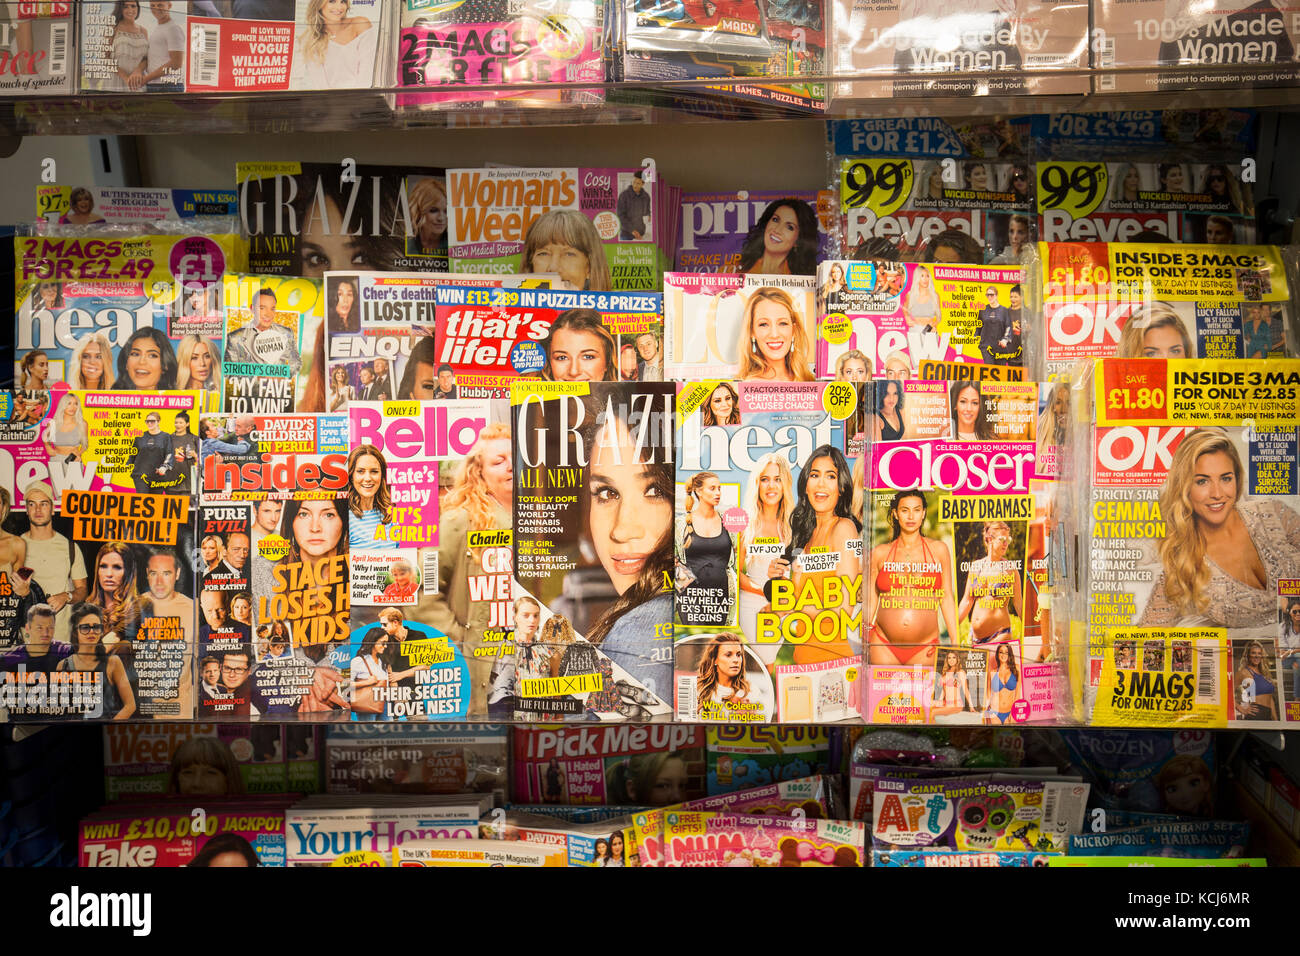 Magazines on sale in a supermaket Stock Photo